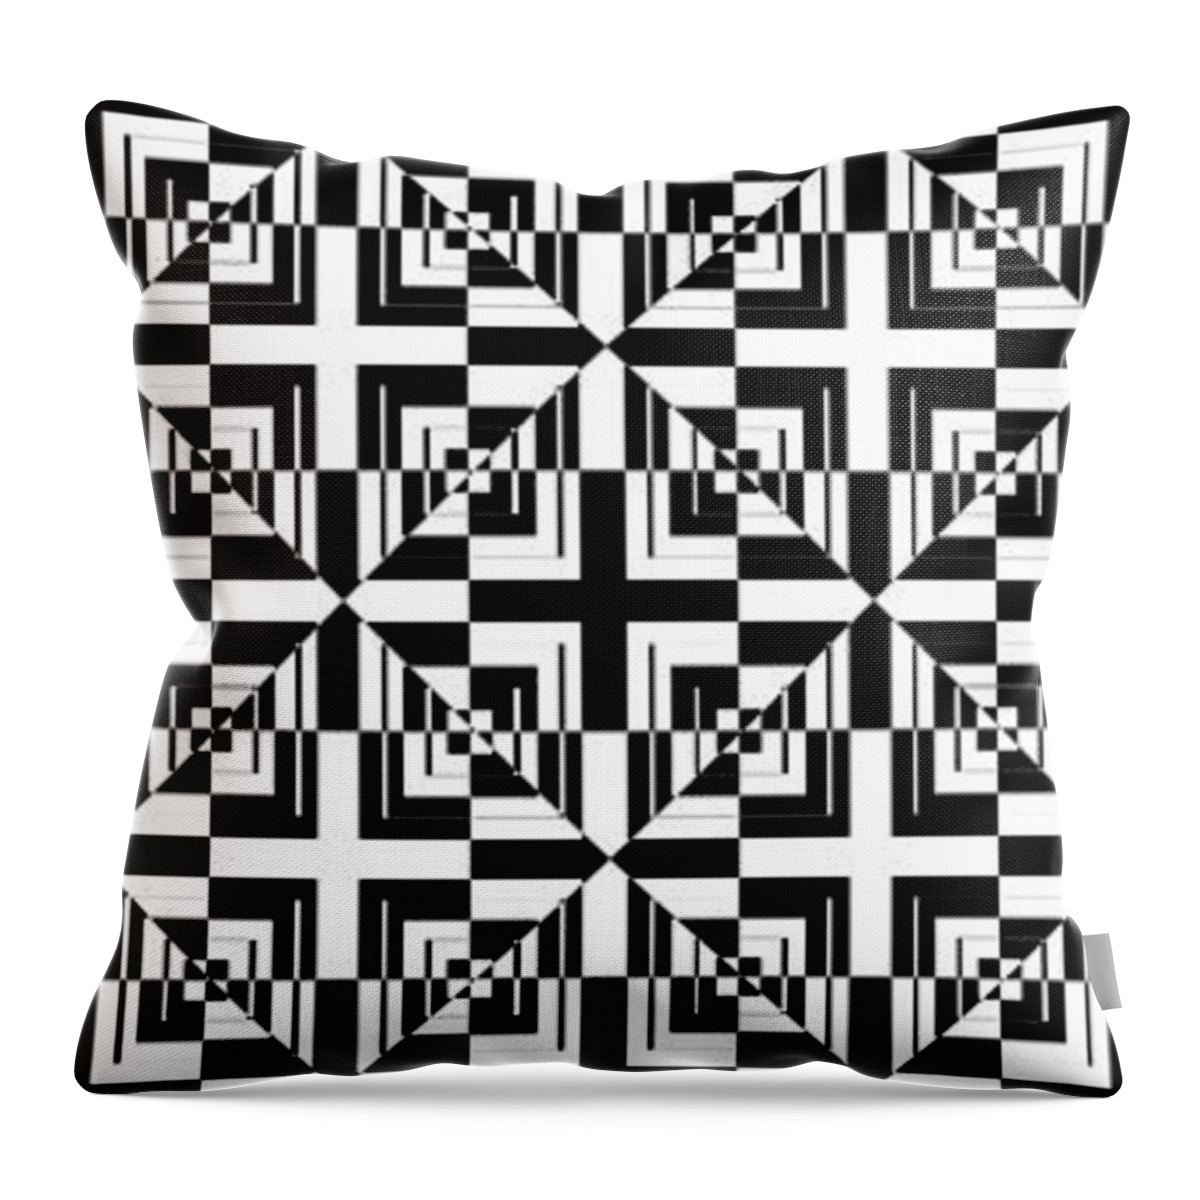 Black & White Throw Pillow featuring the digital art Mind Games 45 by Mike McGlothlen